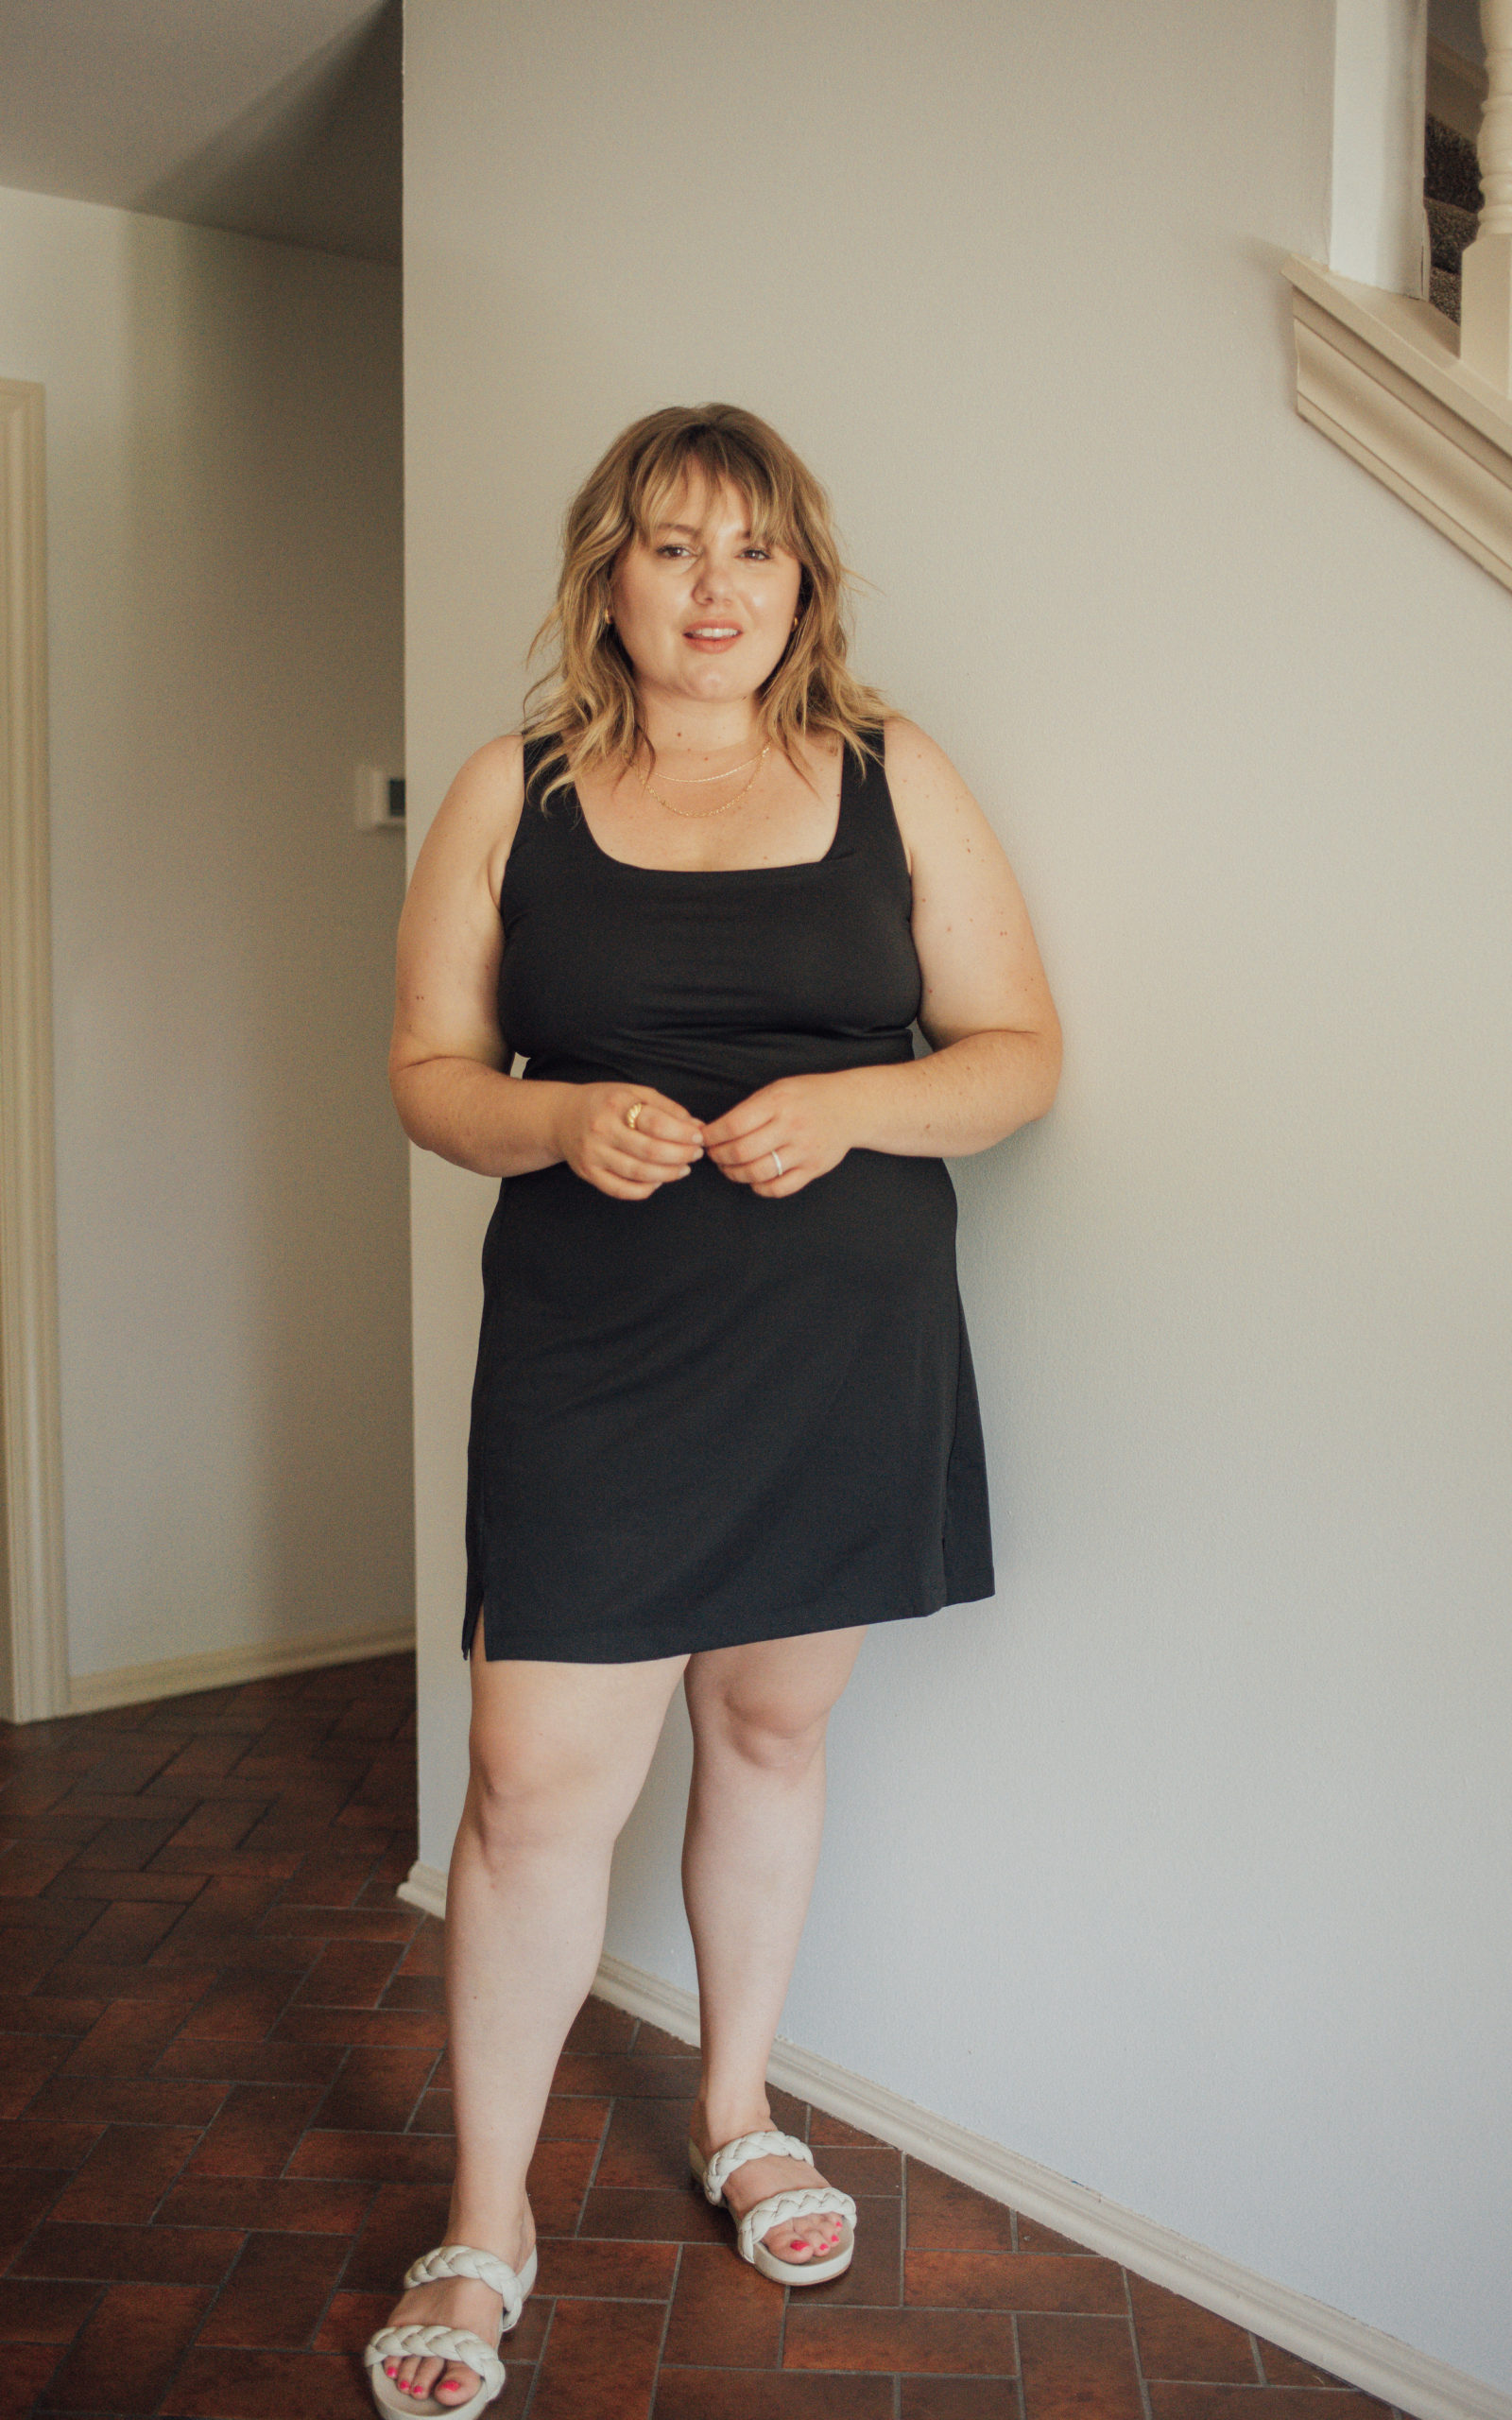 Sharing a look at the Athletic Dress trend and where you can shop for chic plus size options! Built in bra and shorts means super comfy! 